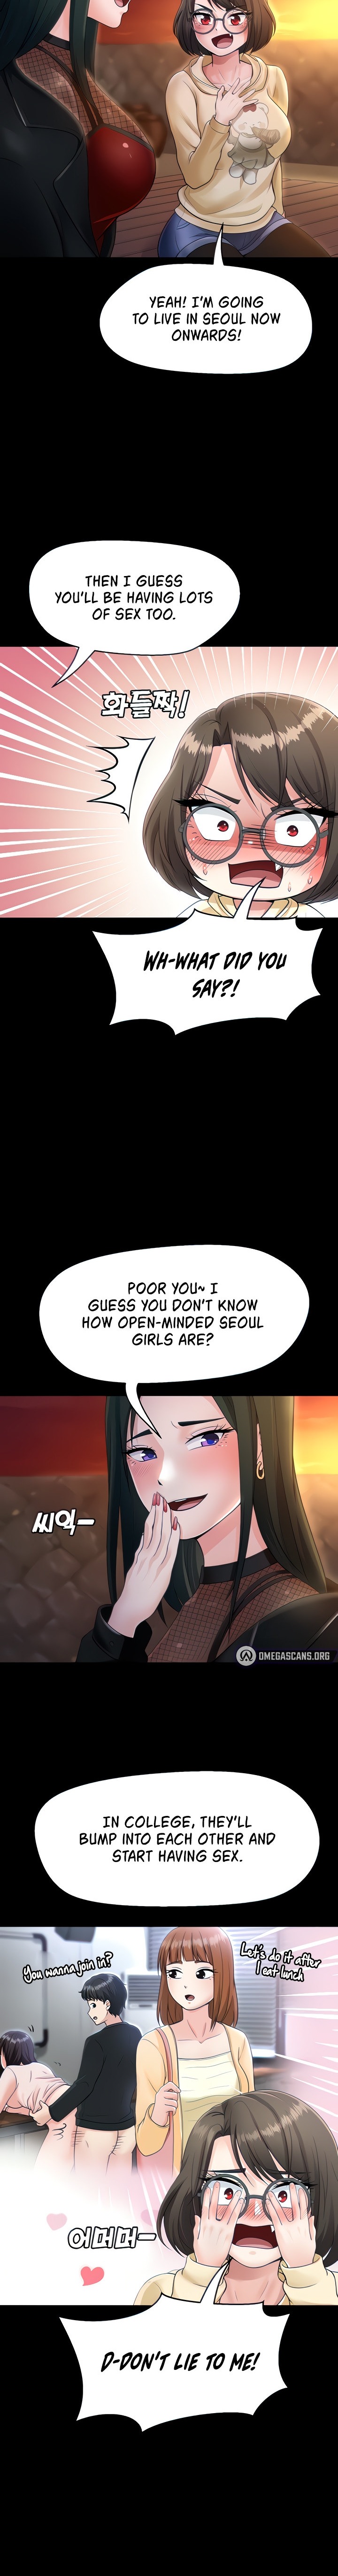 Seoul Kids These Days - Chapter 3 Page 3